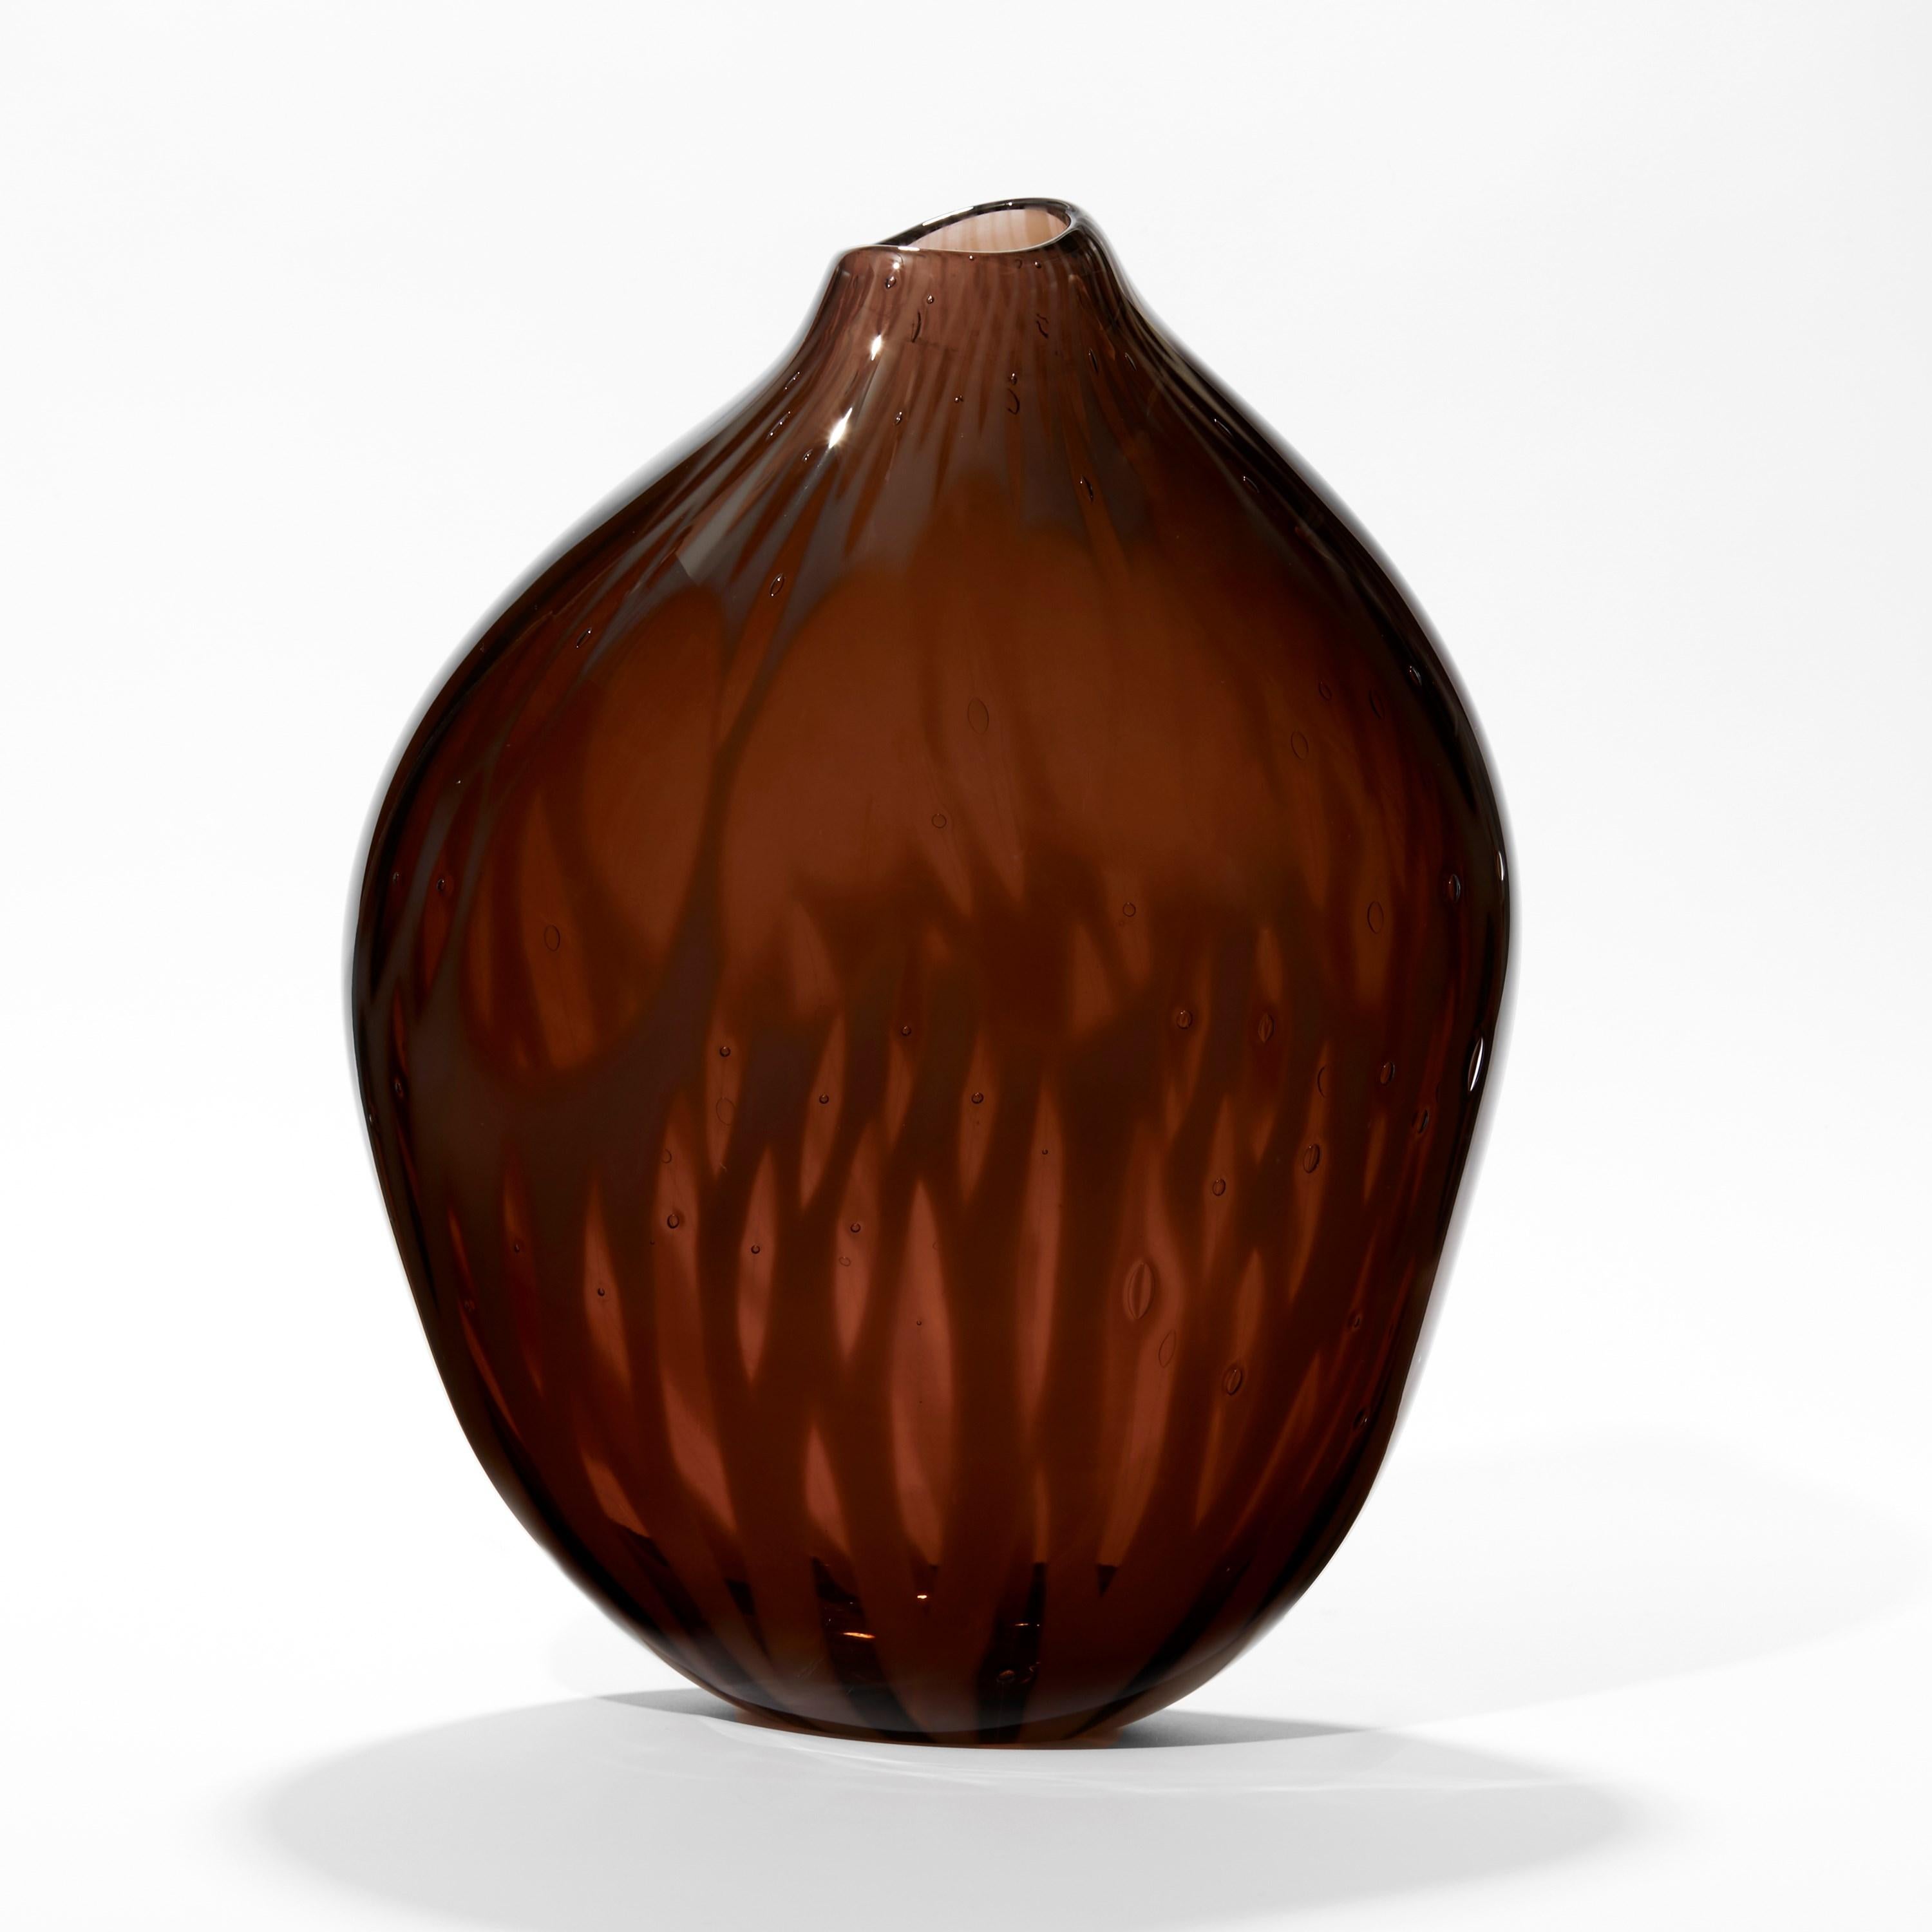 'Plum' is a unique glass artwork by the Canadian artist, Michèle Oberdieck.

Michèle Oberdieck explores balance and asymmetry through colour, form and surface decoration. Presenting her sculptural works as a gesture, an expressive mark, often